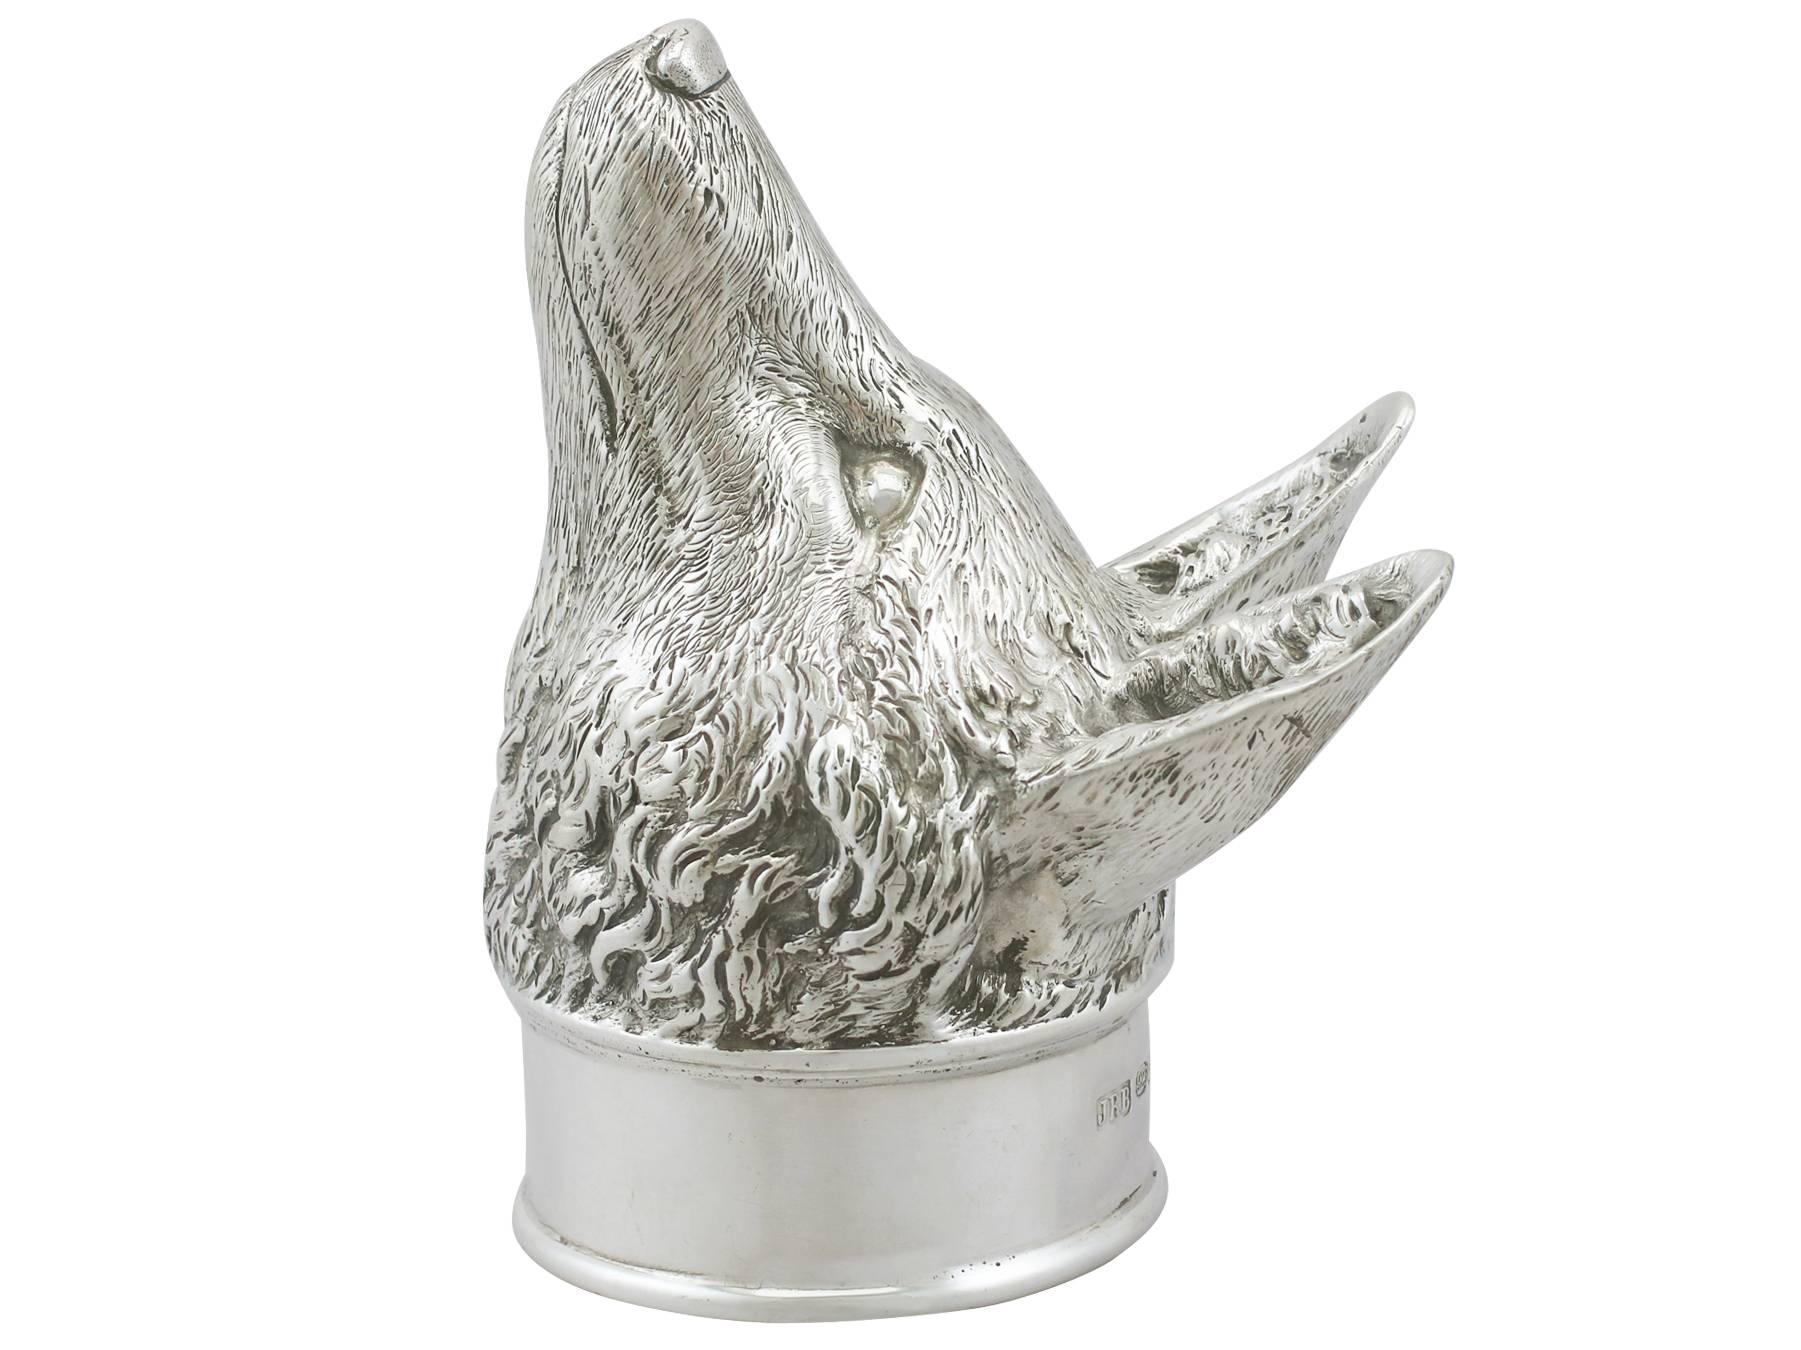 An exceptional, fine and impressive contemporary cast sterling silver stirrup cup modelled in the form of a fox's head, an addition to our diverse silver drinking vessels collection.

This exceptional contemporary cast sterling silver stirrup cup